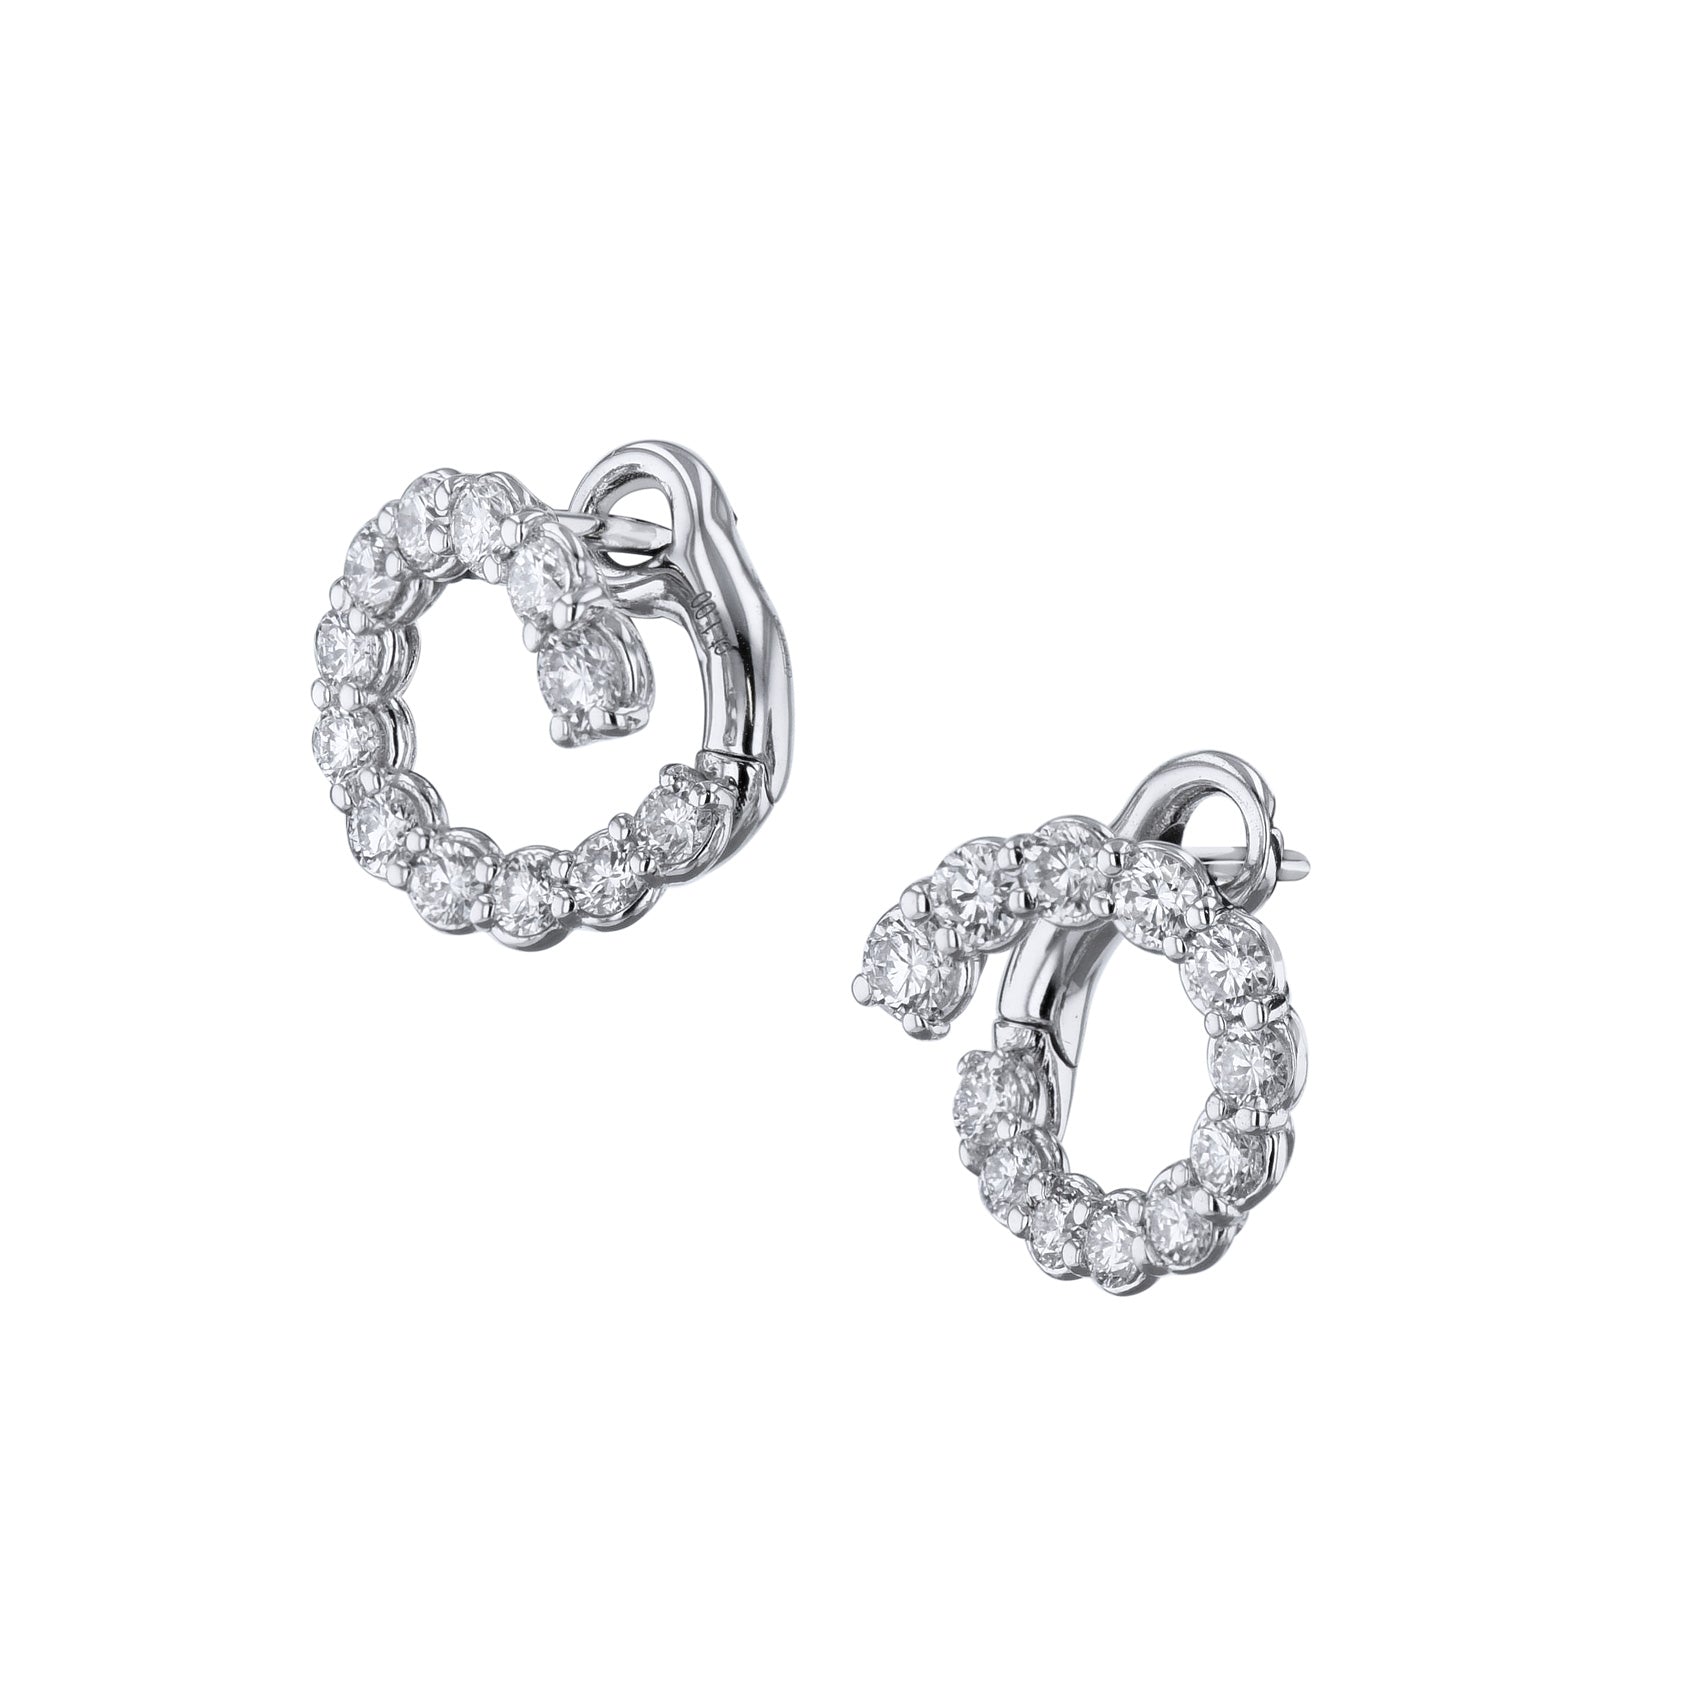 White Gold Diamond Earrings Earrings Curated by H